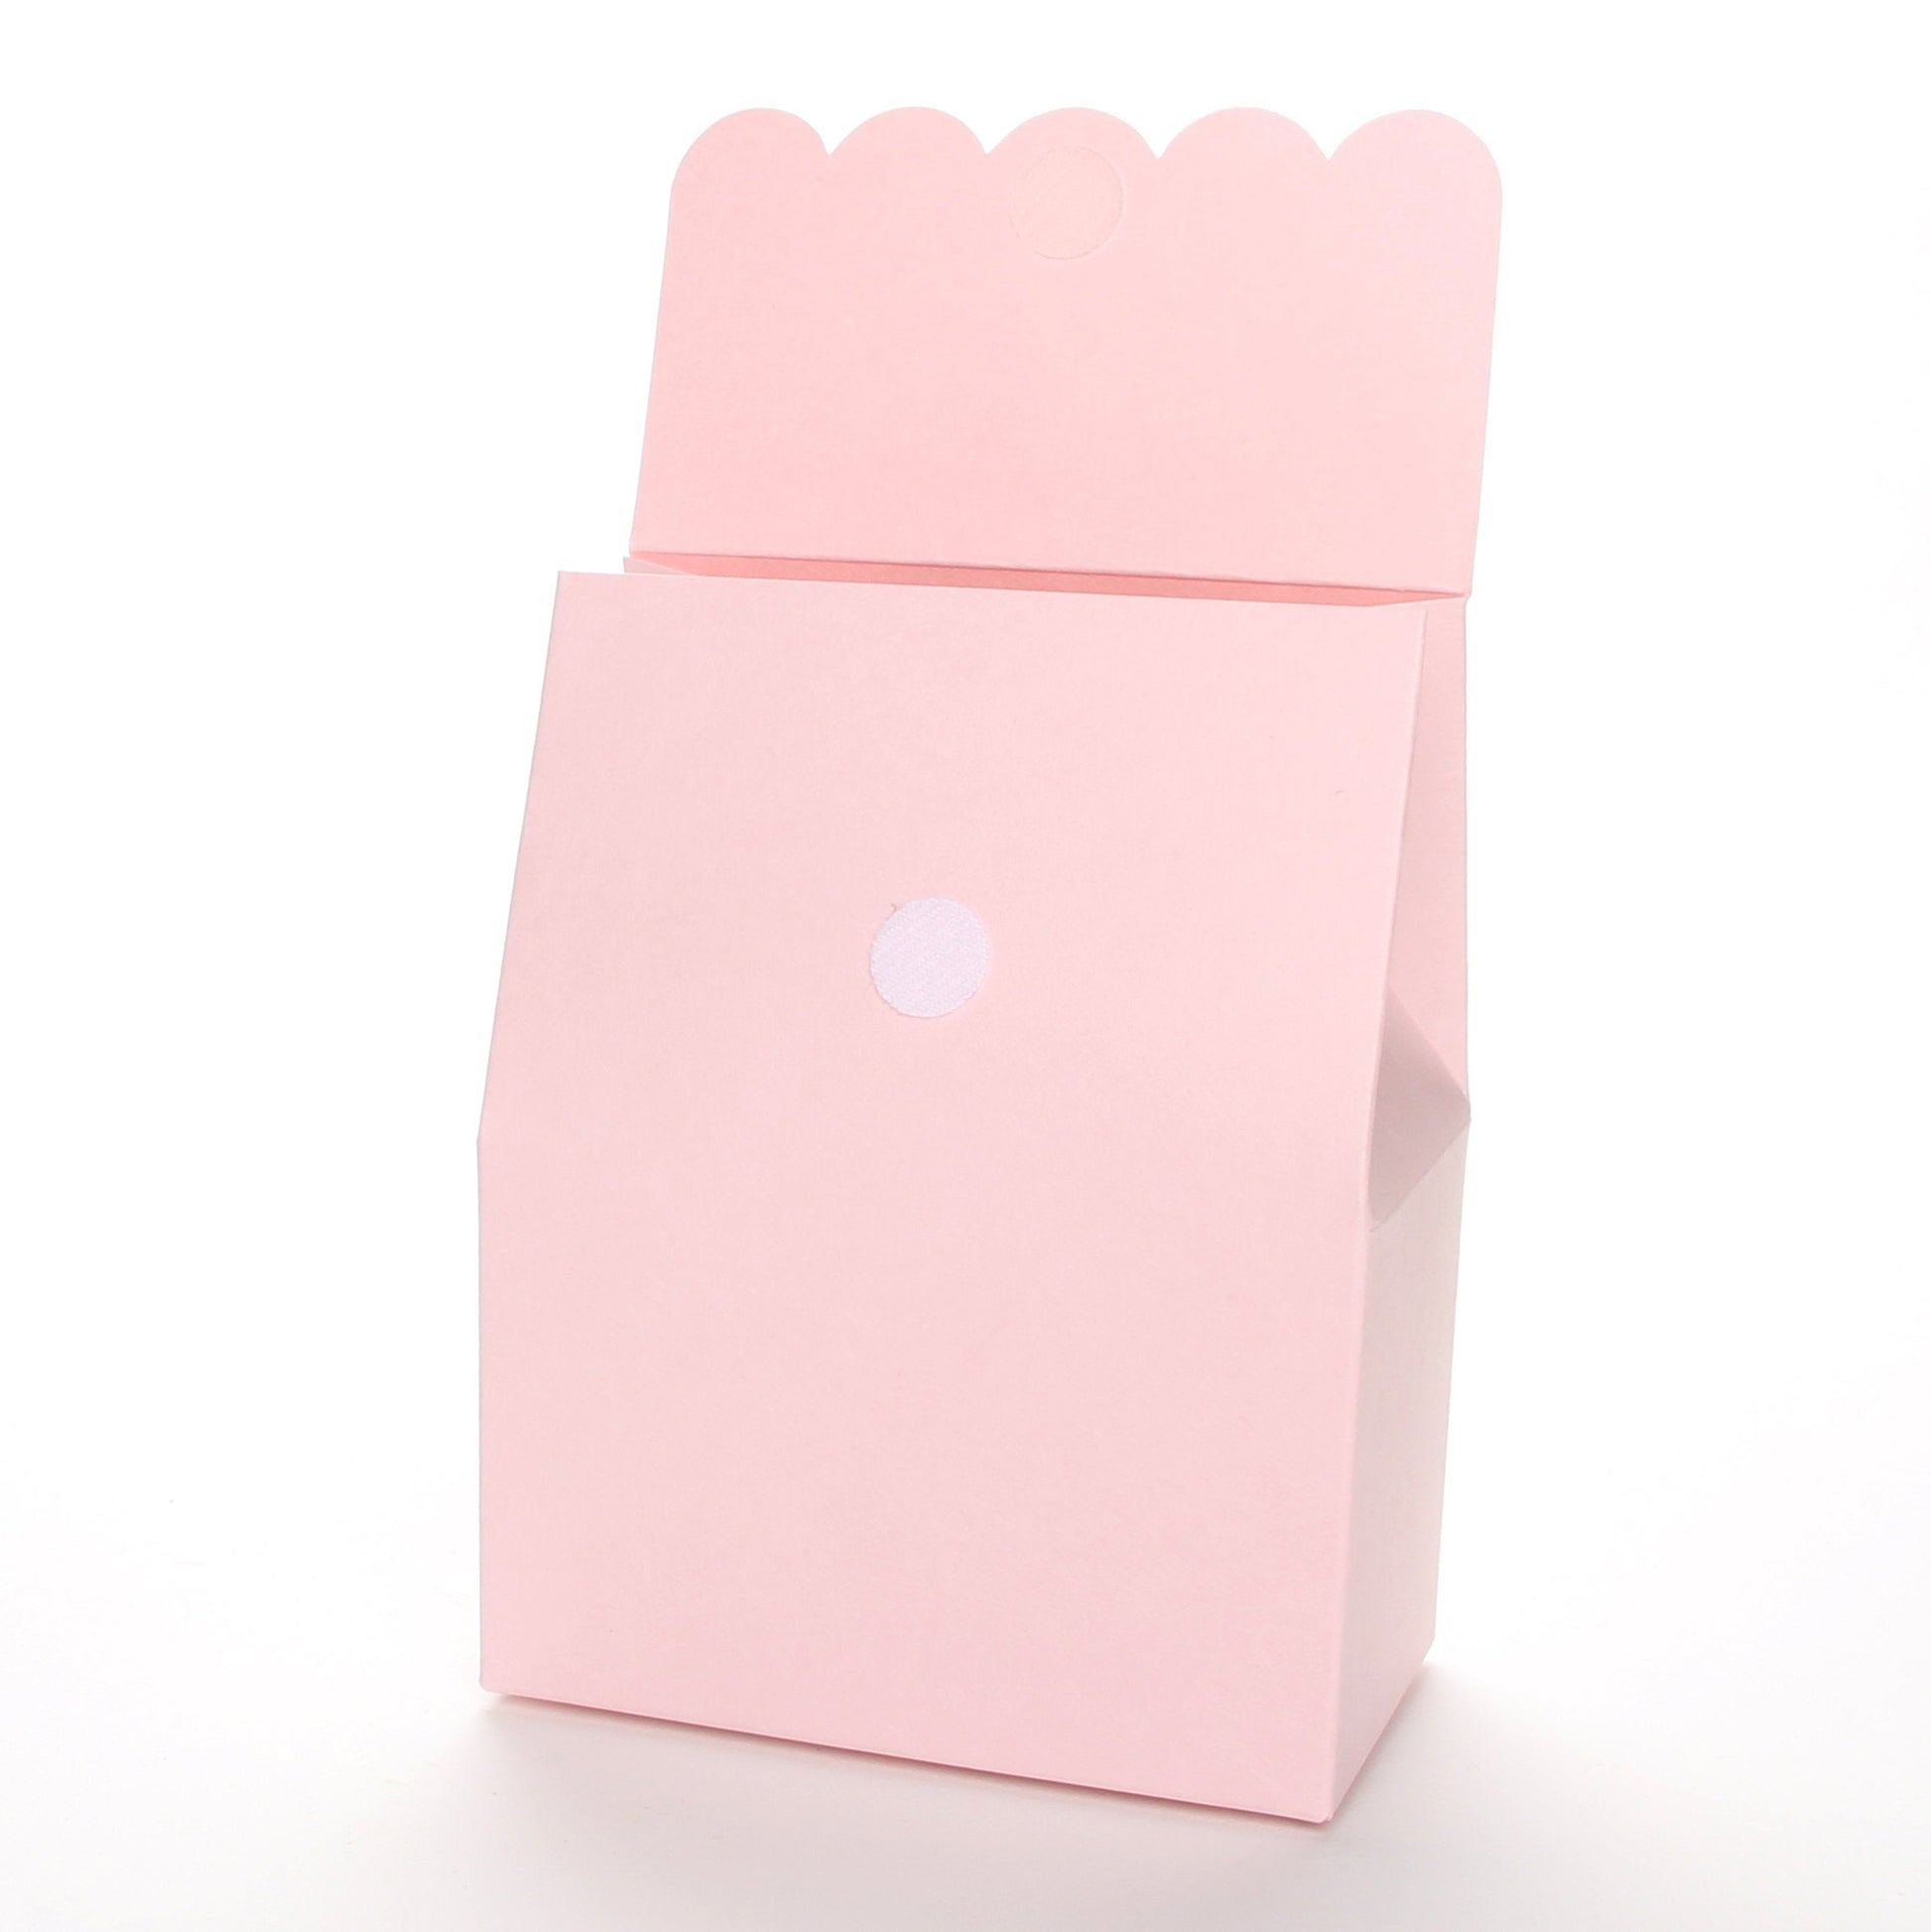 Lux Party’s pink favor box with scalloped lid open, showing a velcro closure.